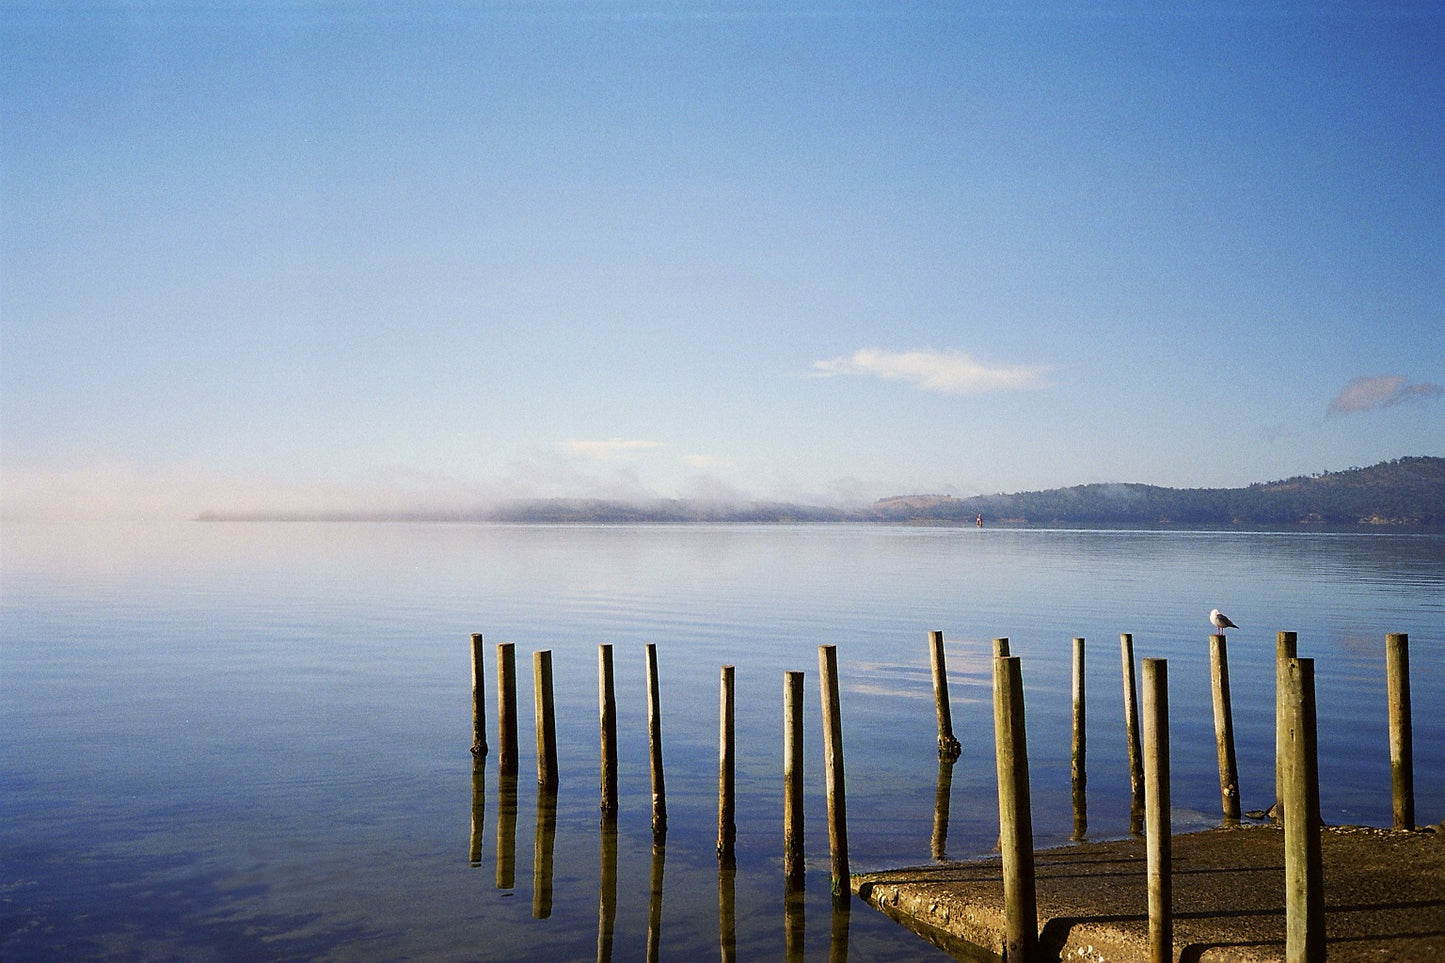 range Tasmania greeting card image of middleton jetty with Bruny island shown in background